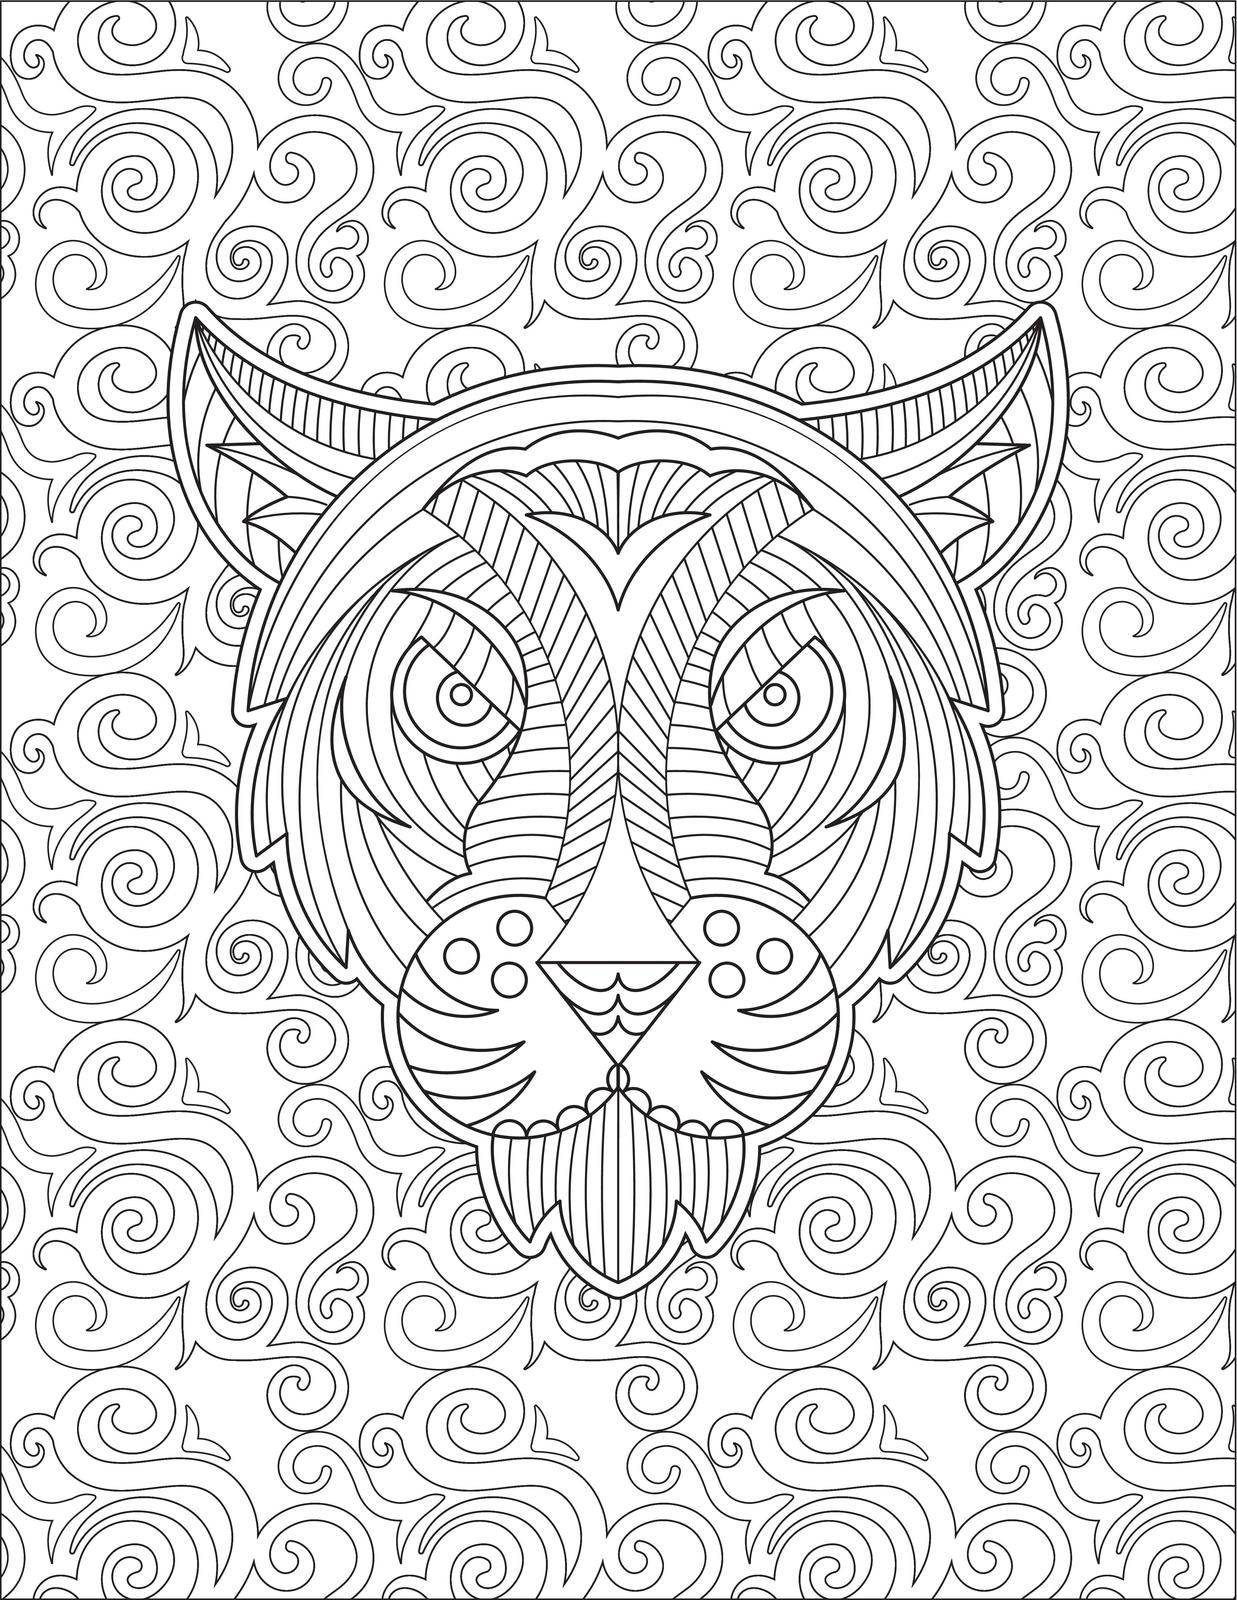 Tiger Face With Geometric Details Line Drawing Coloring Book